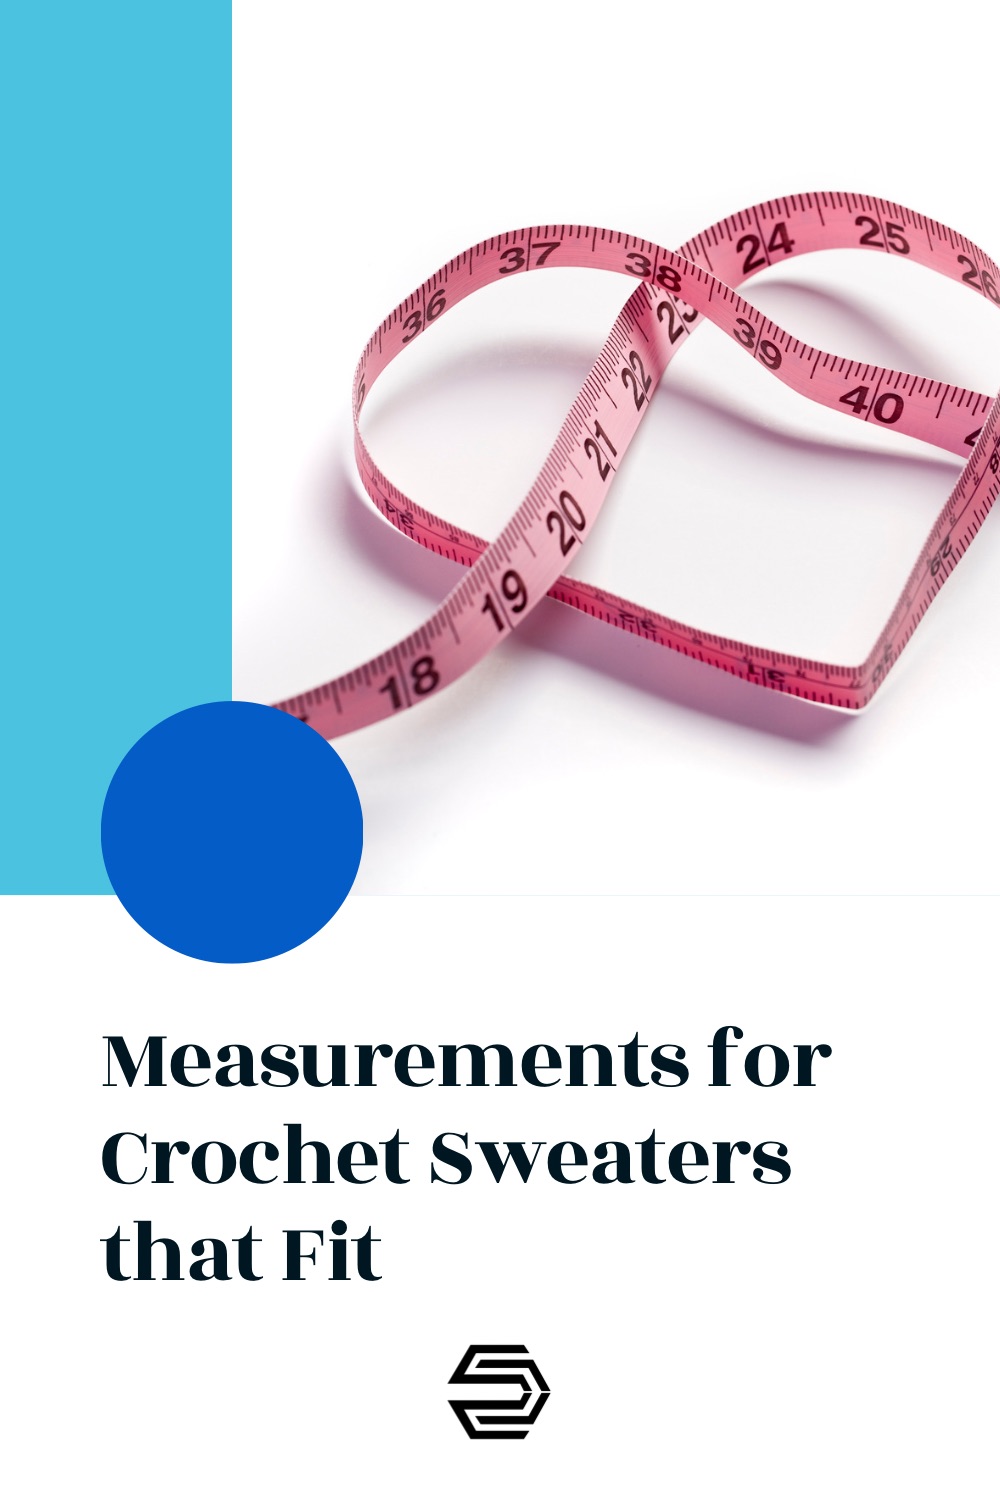 Know what body measurements to take when making a crochet sweater.